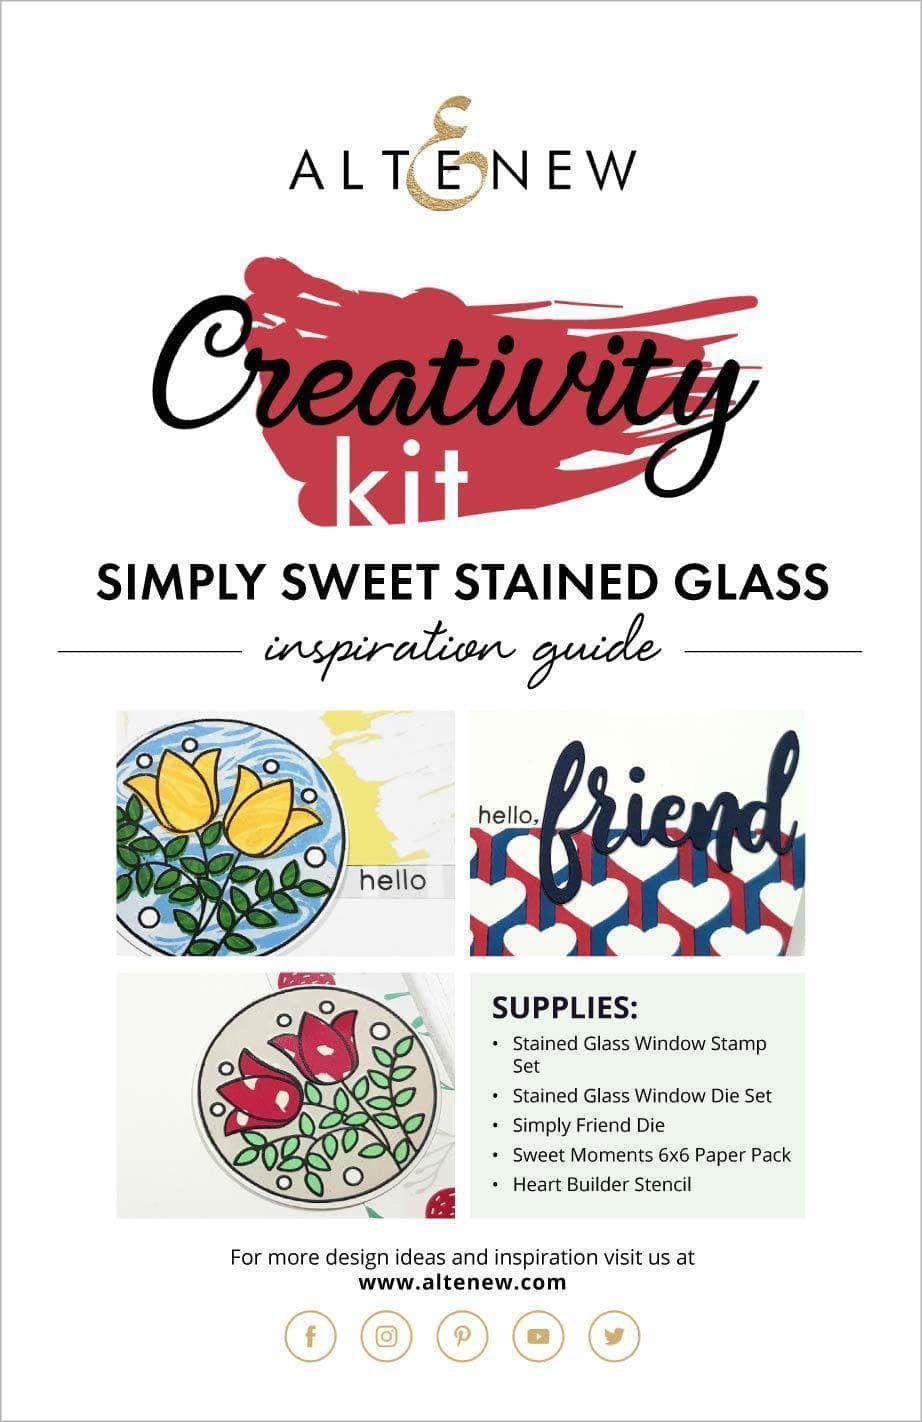 Printed Media Simply Sweet Stained Glass Creativity Kit Inspiration Guide